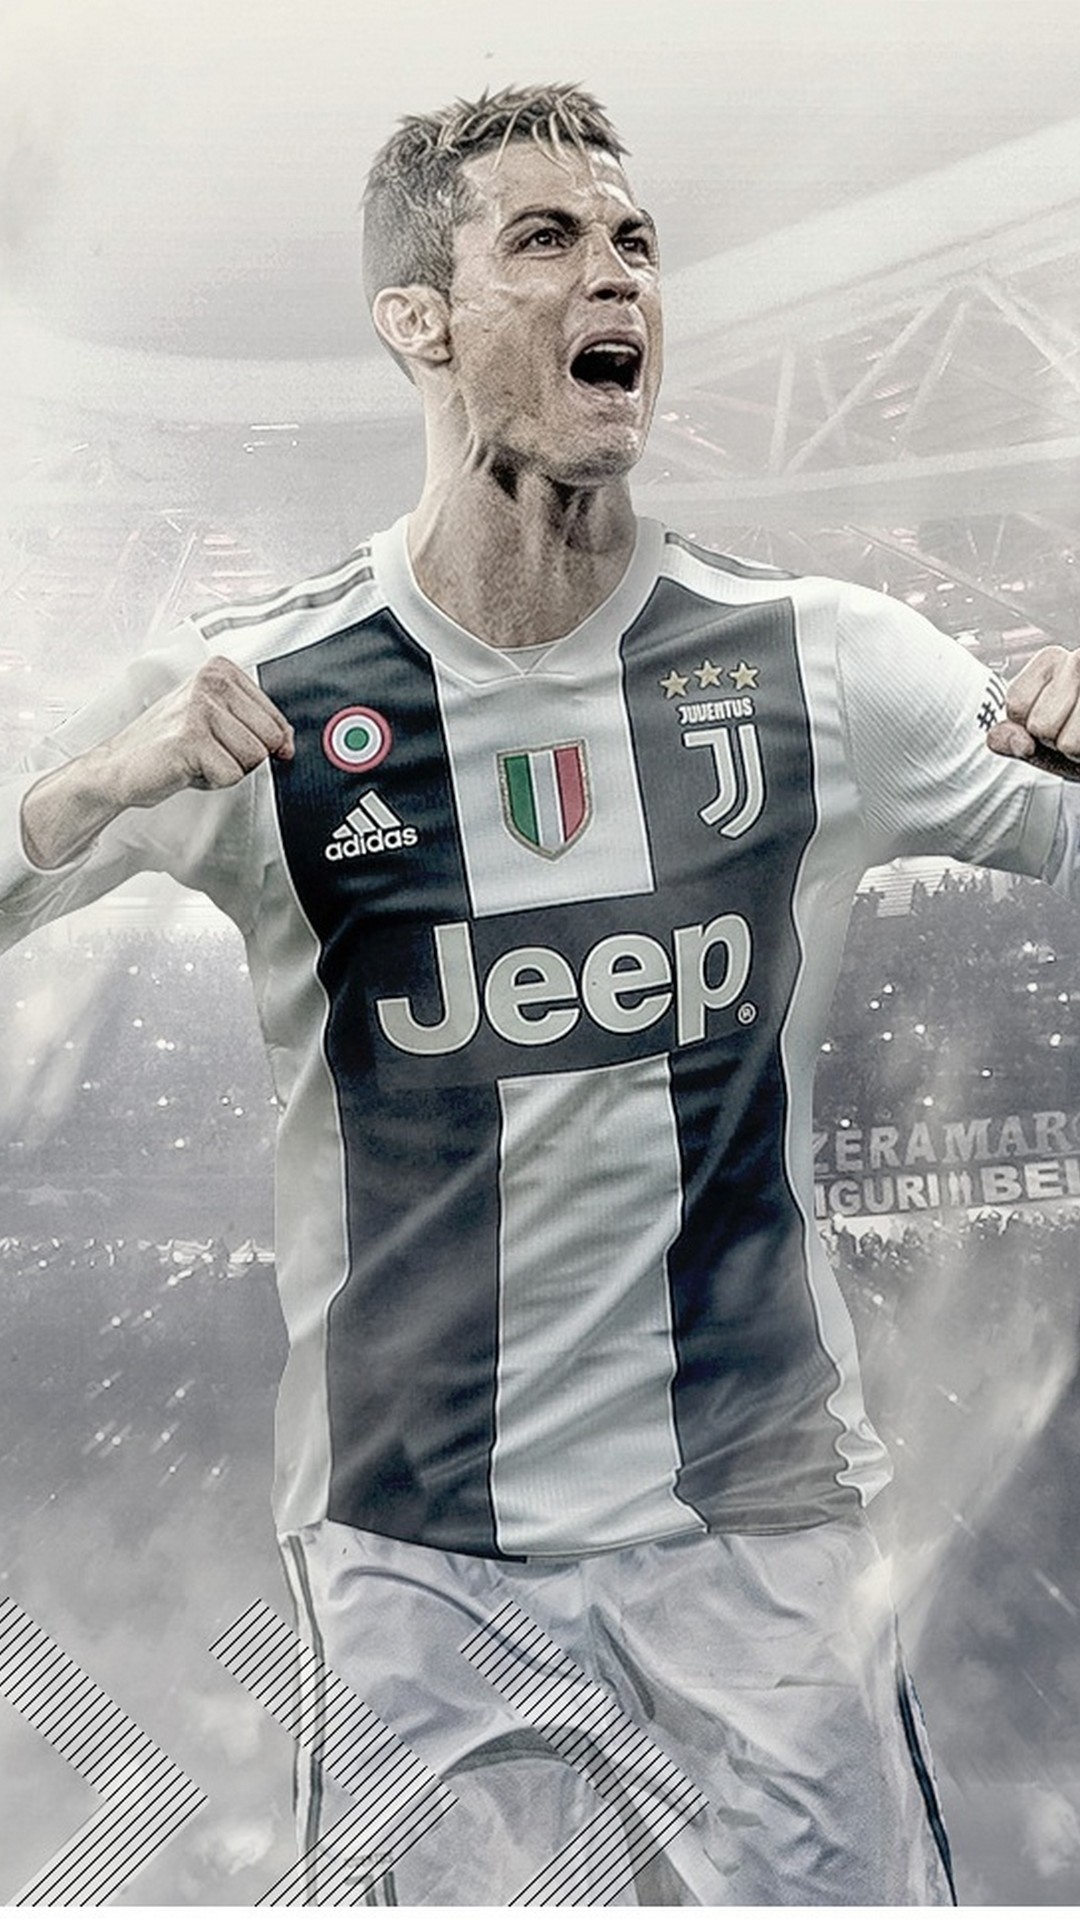 Wallpaper Android Cristiano Ronaldo Juventus with image resolution 1080x1920 pixel. You can make this wallpaper for your Android backgrounds, Tablet, Smartphones Screensavers and Mobile Phone Lock Screen